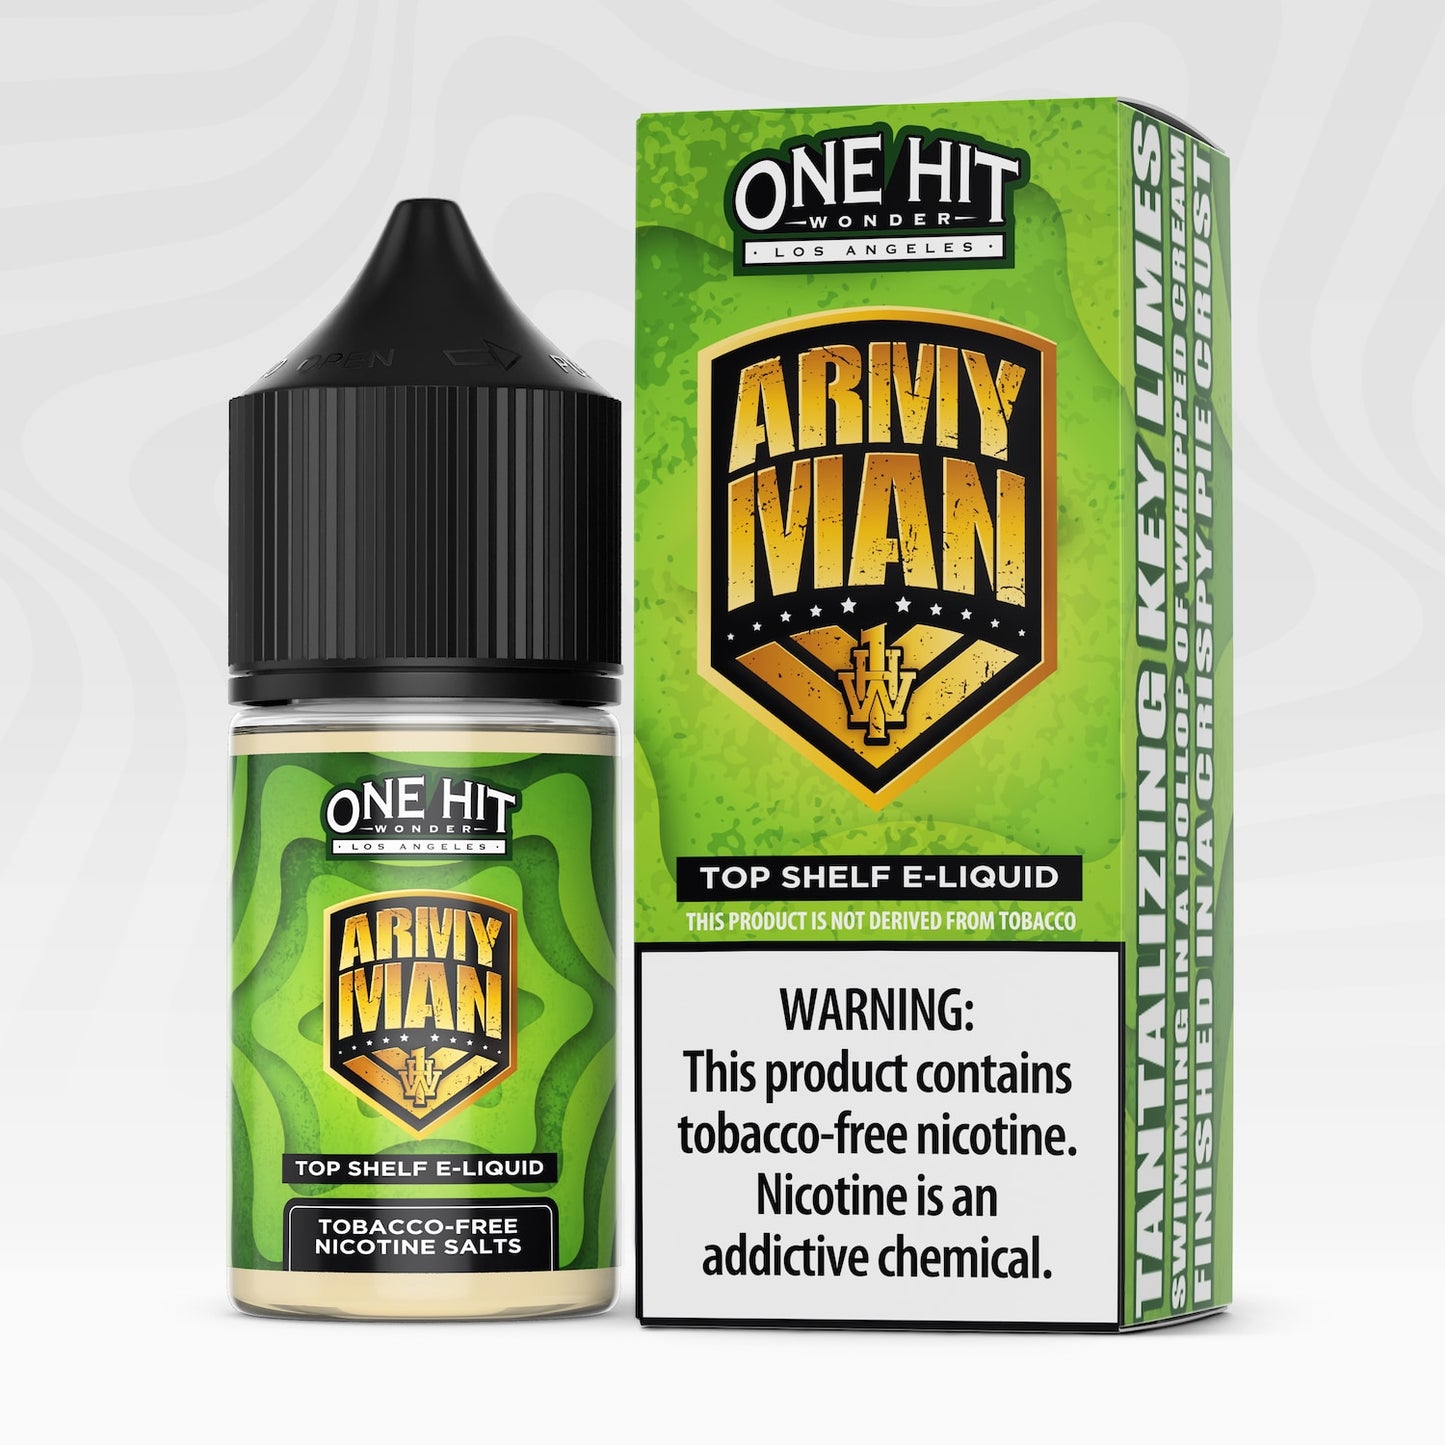 Army Man TF-Nic by One Hit Wonder TF-Nic Salt Series 30mL with Packaging